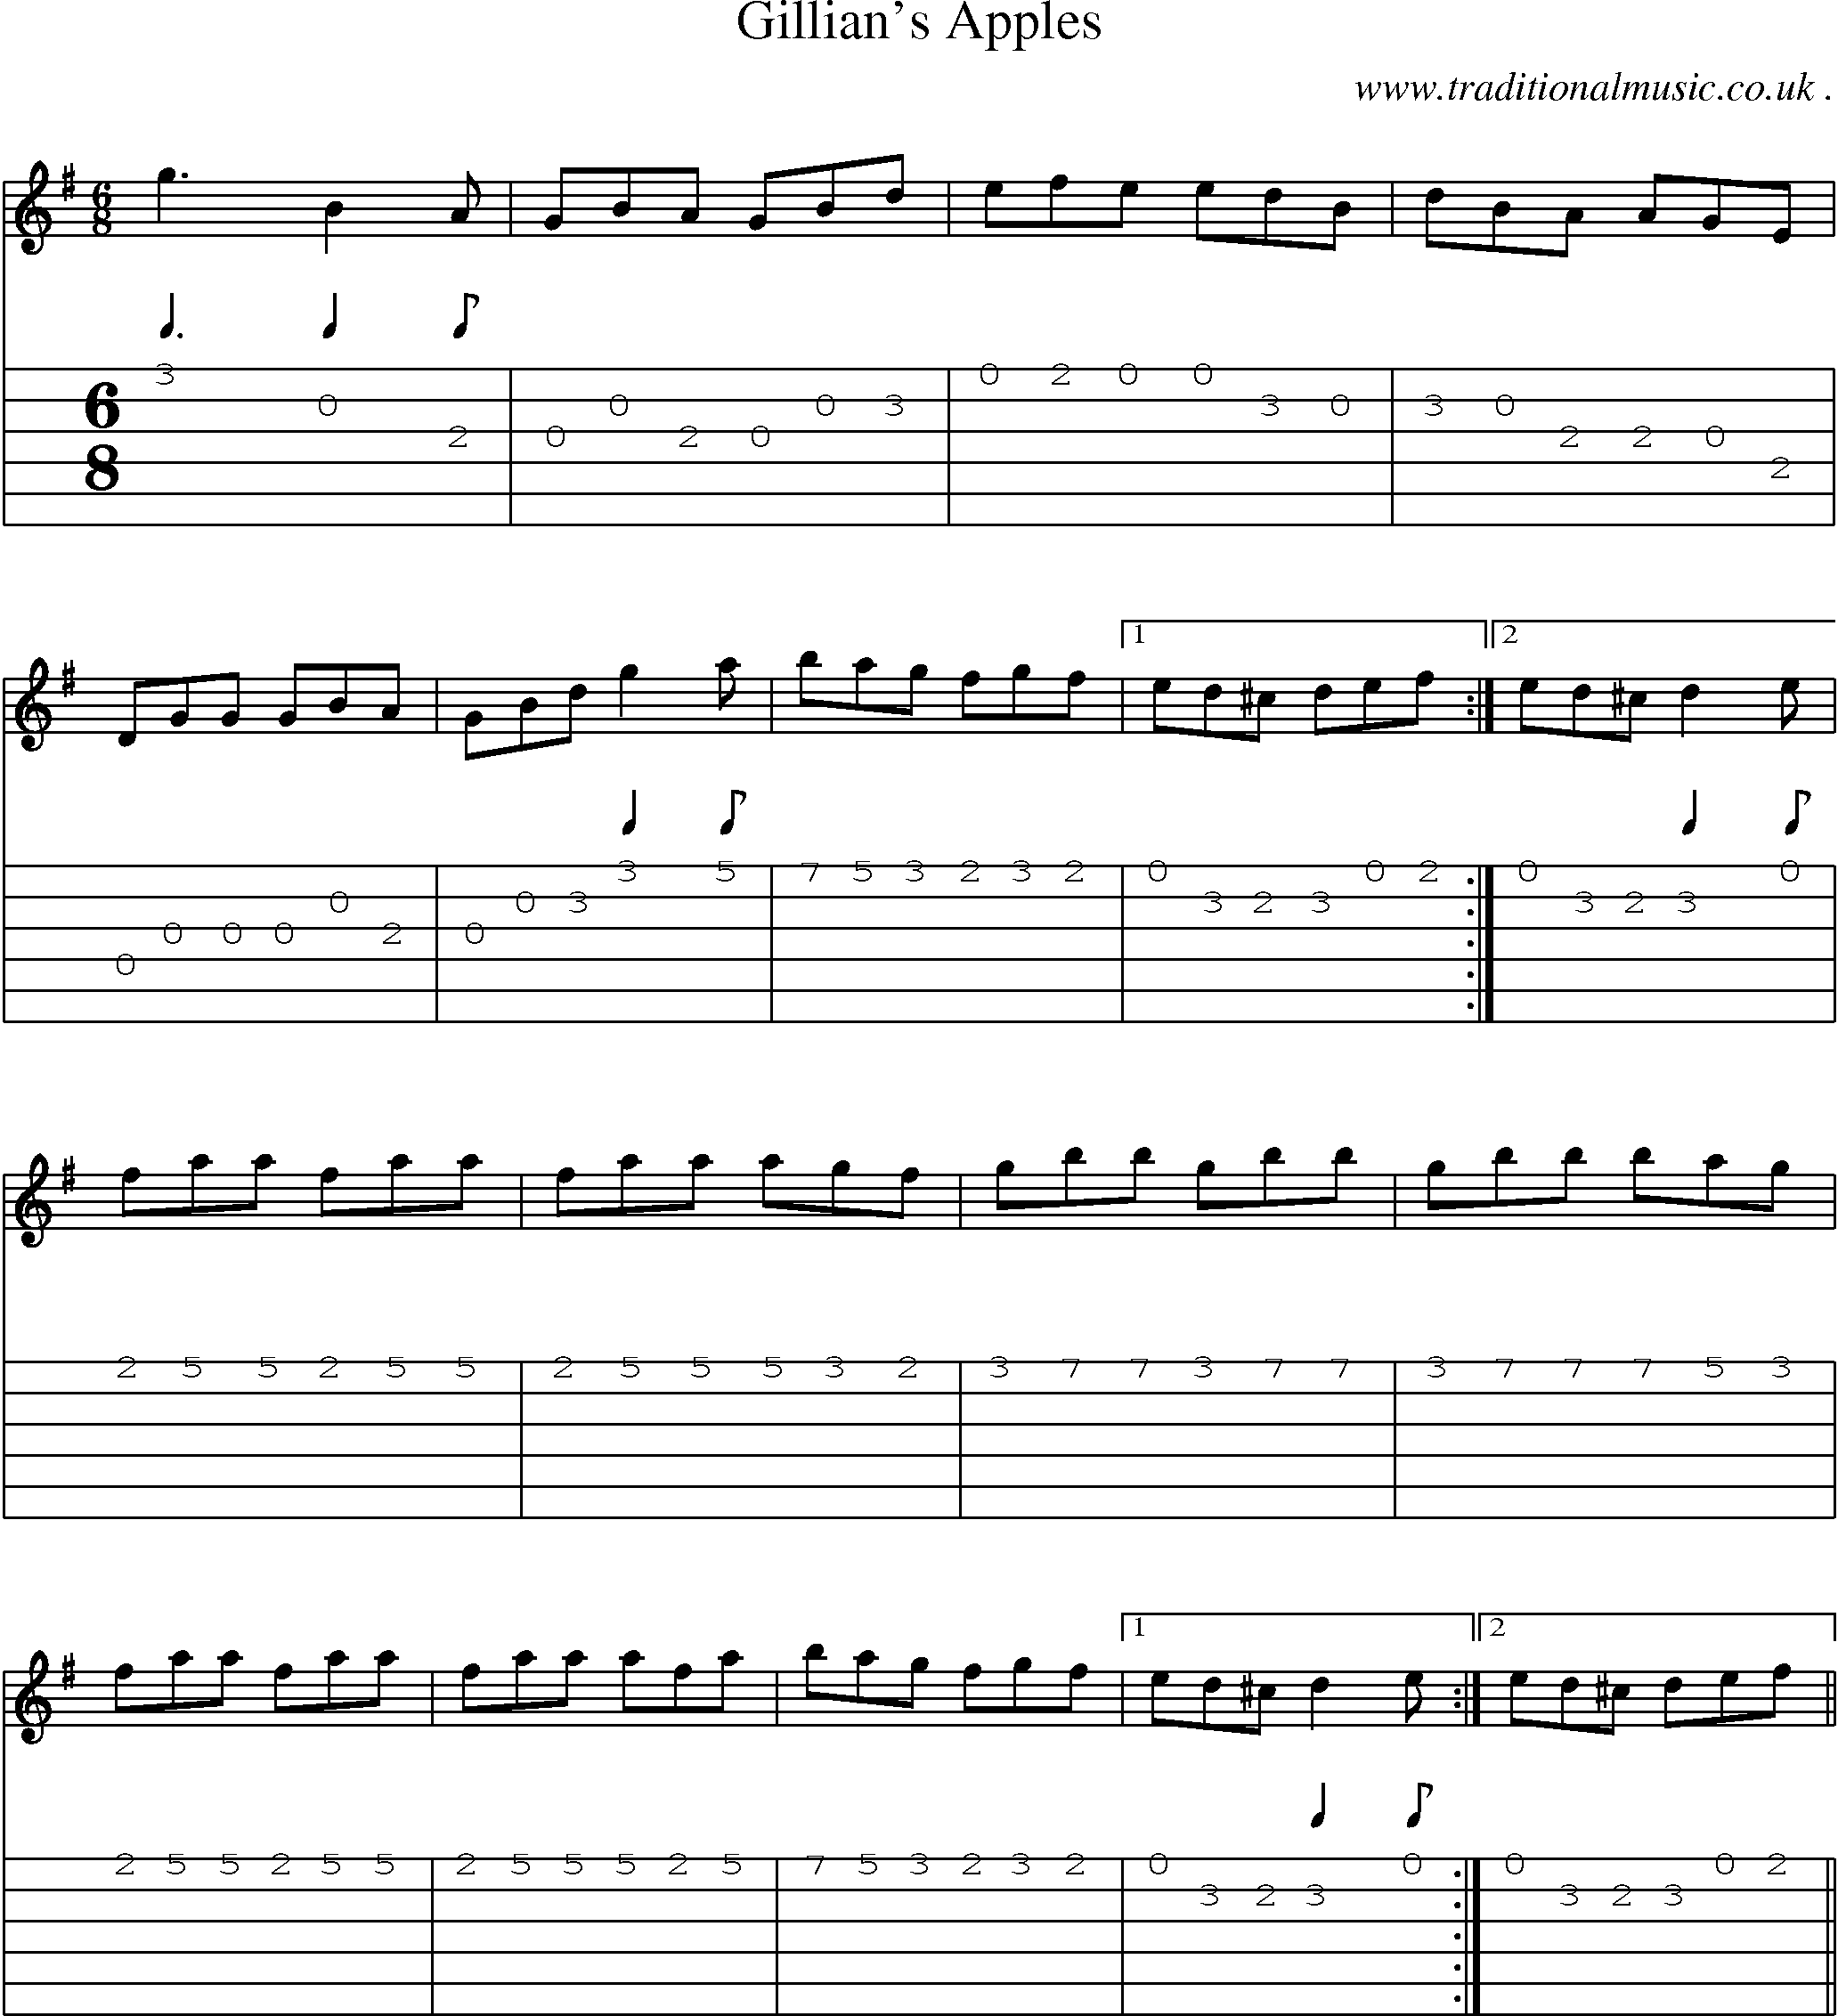 Sheet-Music and Guitar Tabs for Gillians Apples